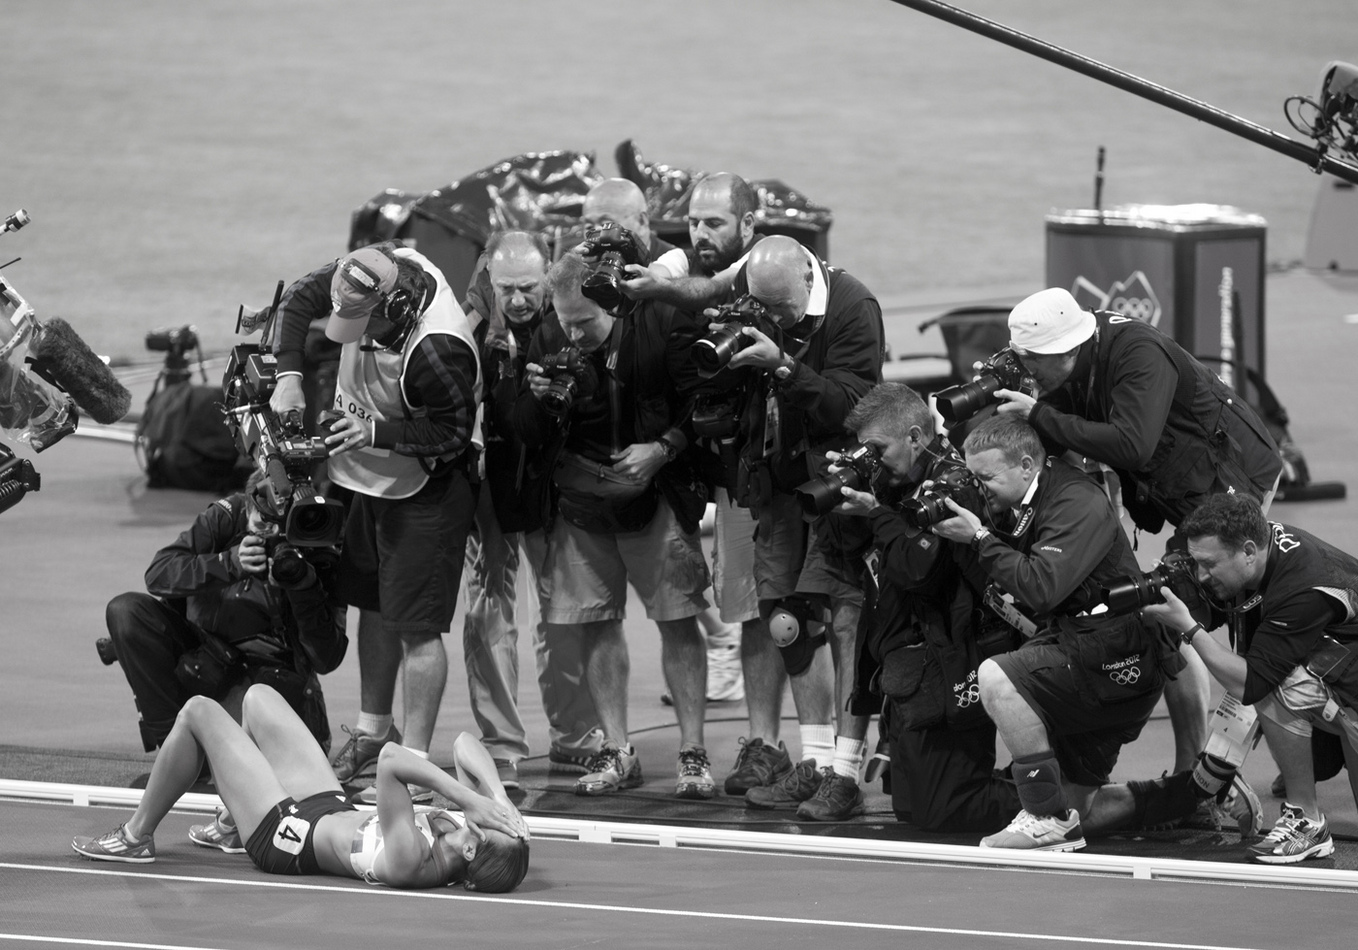 Jessica Ennis collapses at Finish Line after winning Heptathalon